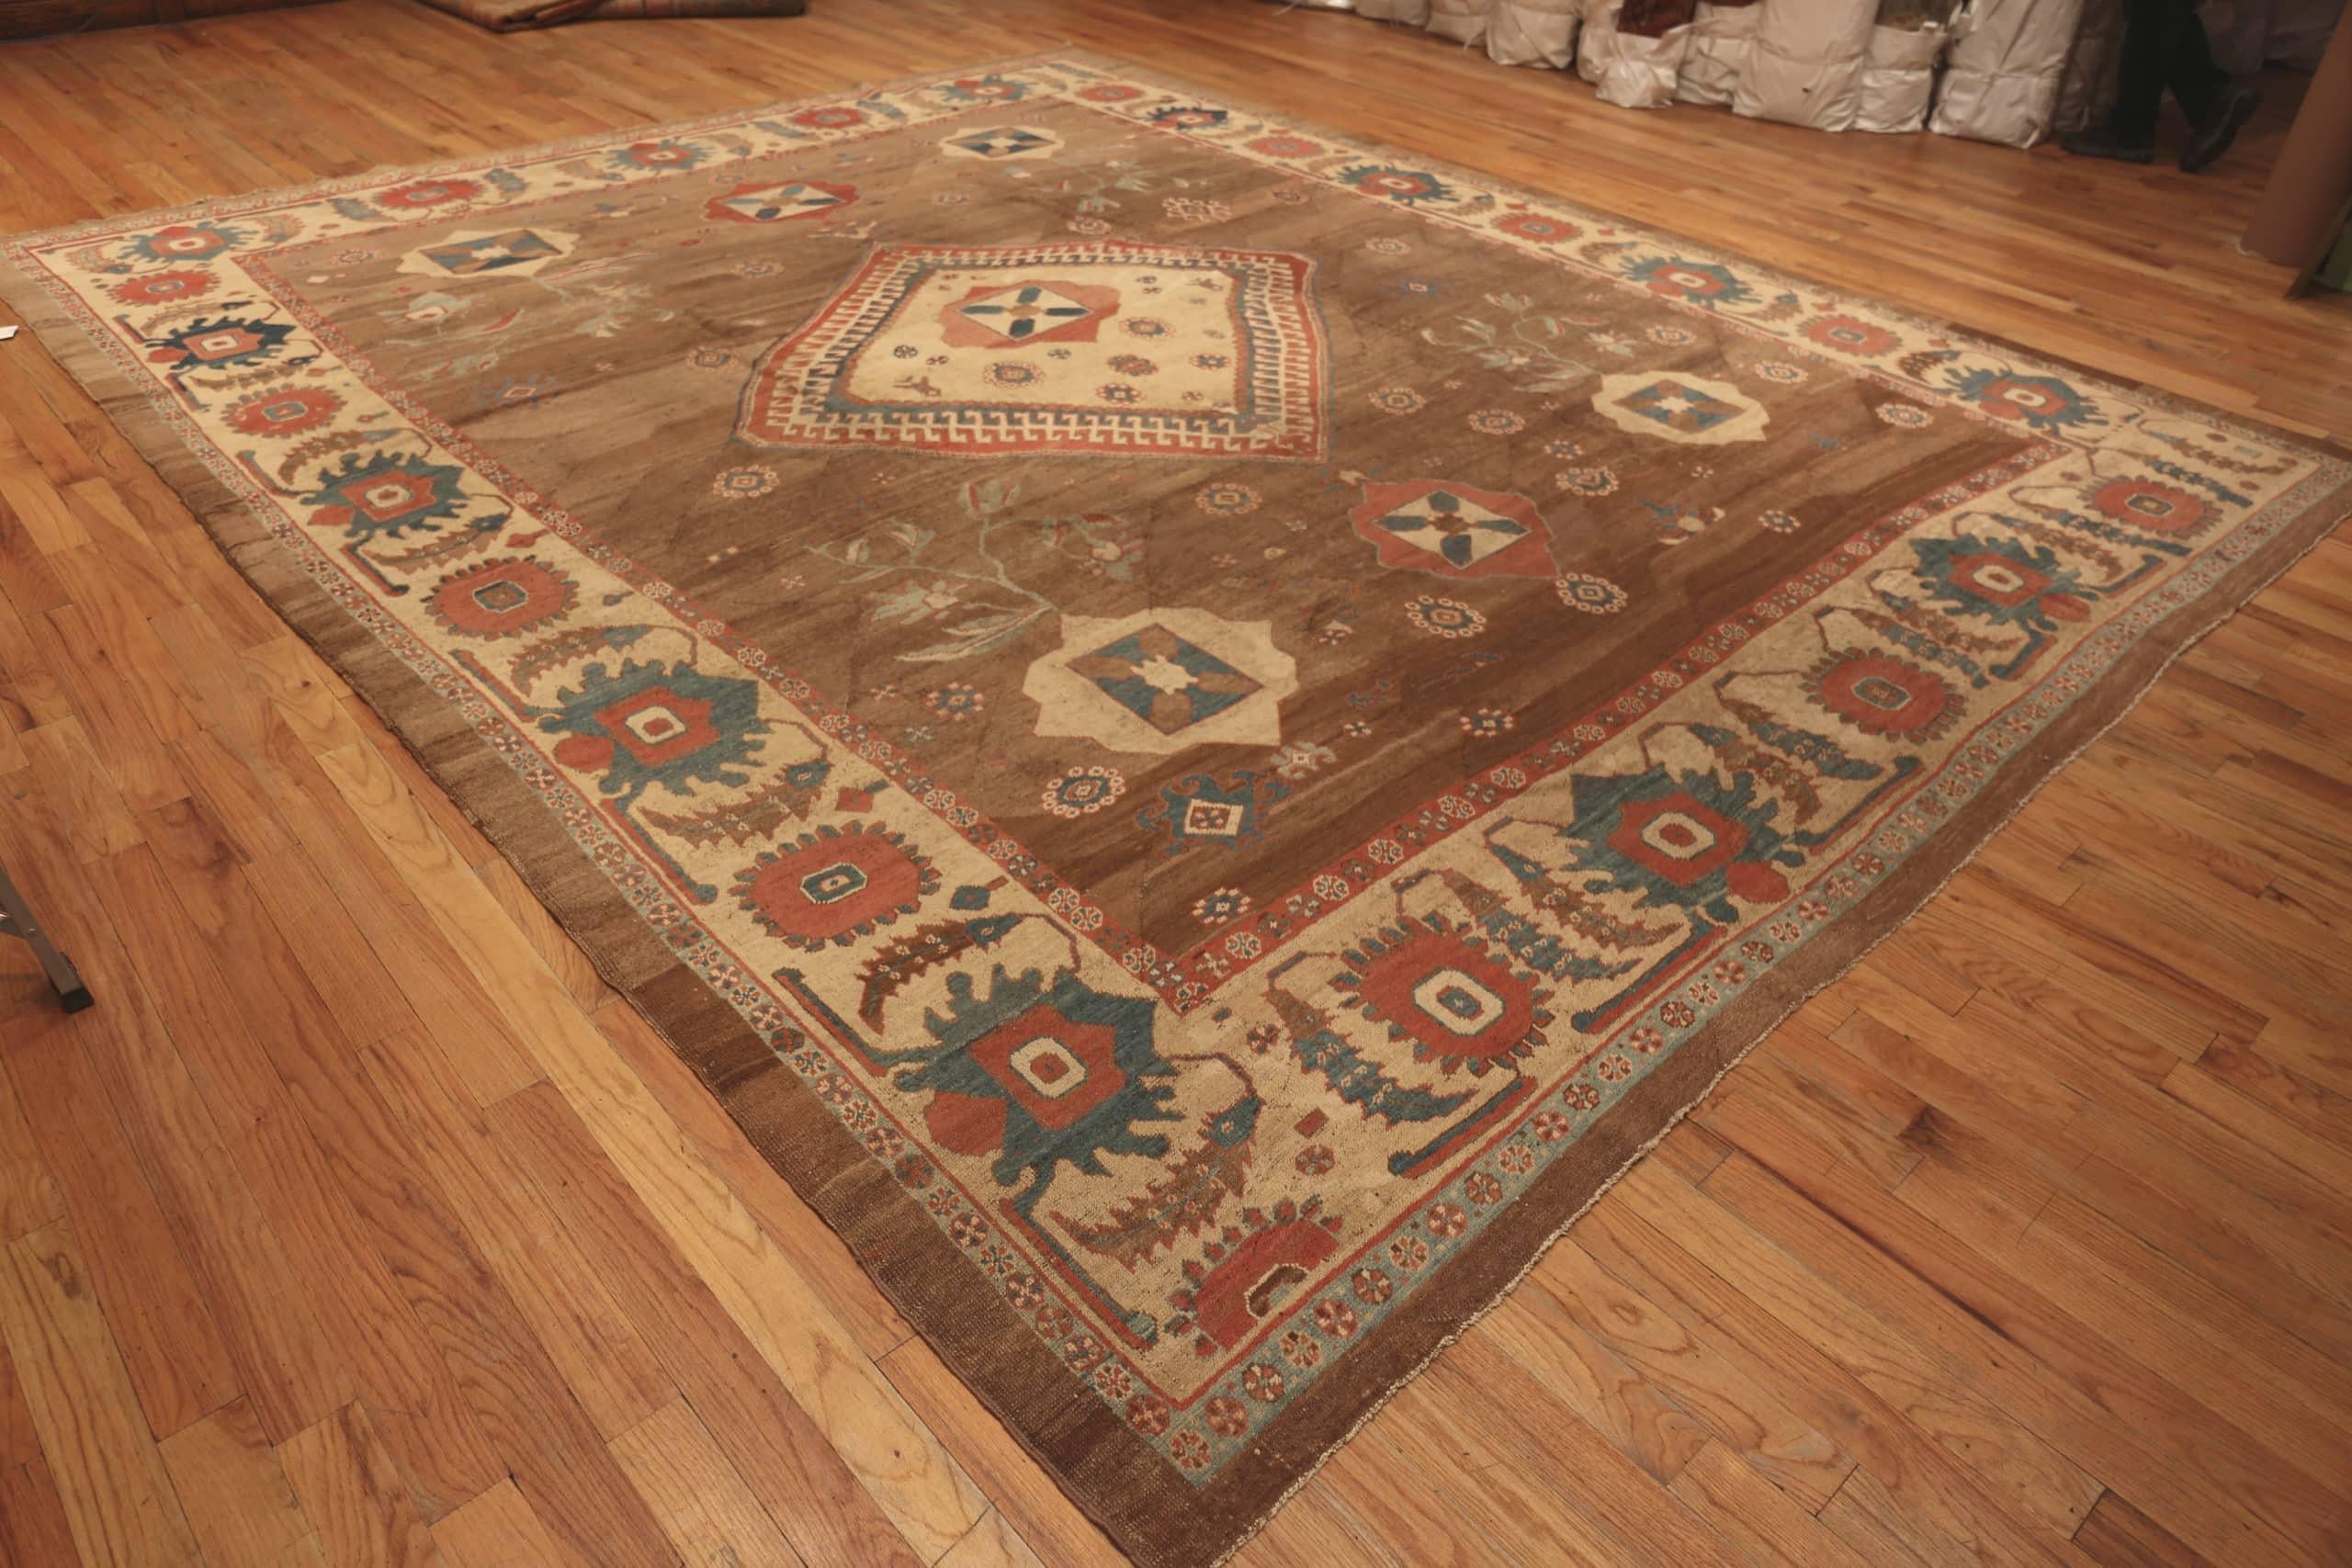 Antique Persian Bakshaish Rug, Country of Origin / rug type: Persian rug, Circa date: Mid 19th Century. Size: 12 ft 2 in x 14 ft 8 in (3.71 m x 4.47 m)



